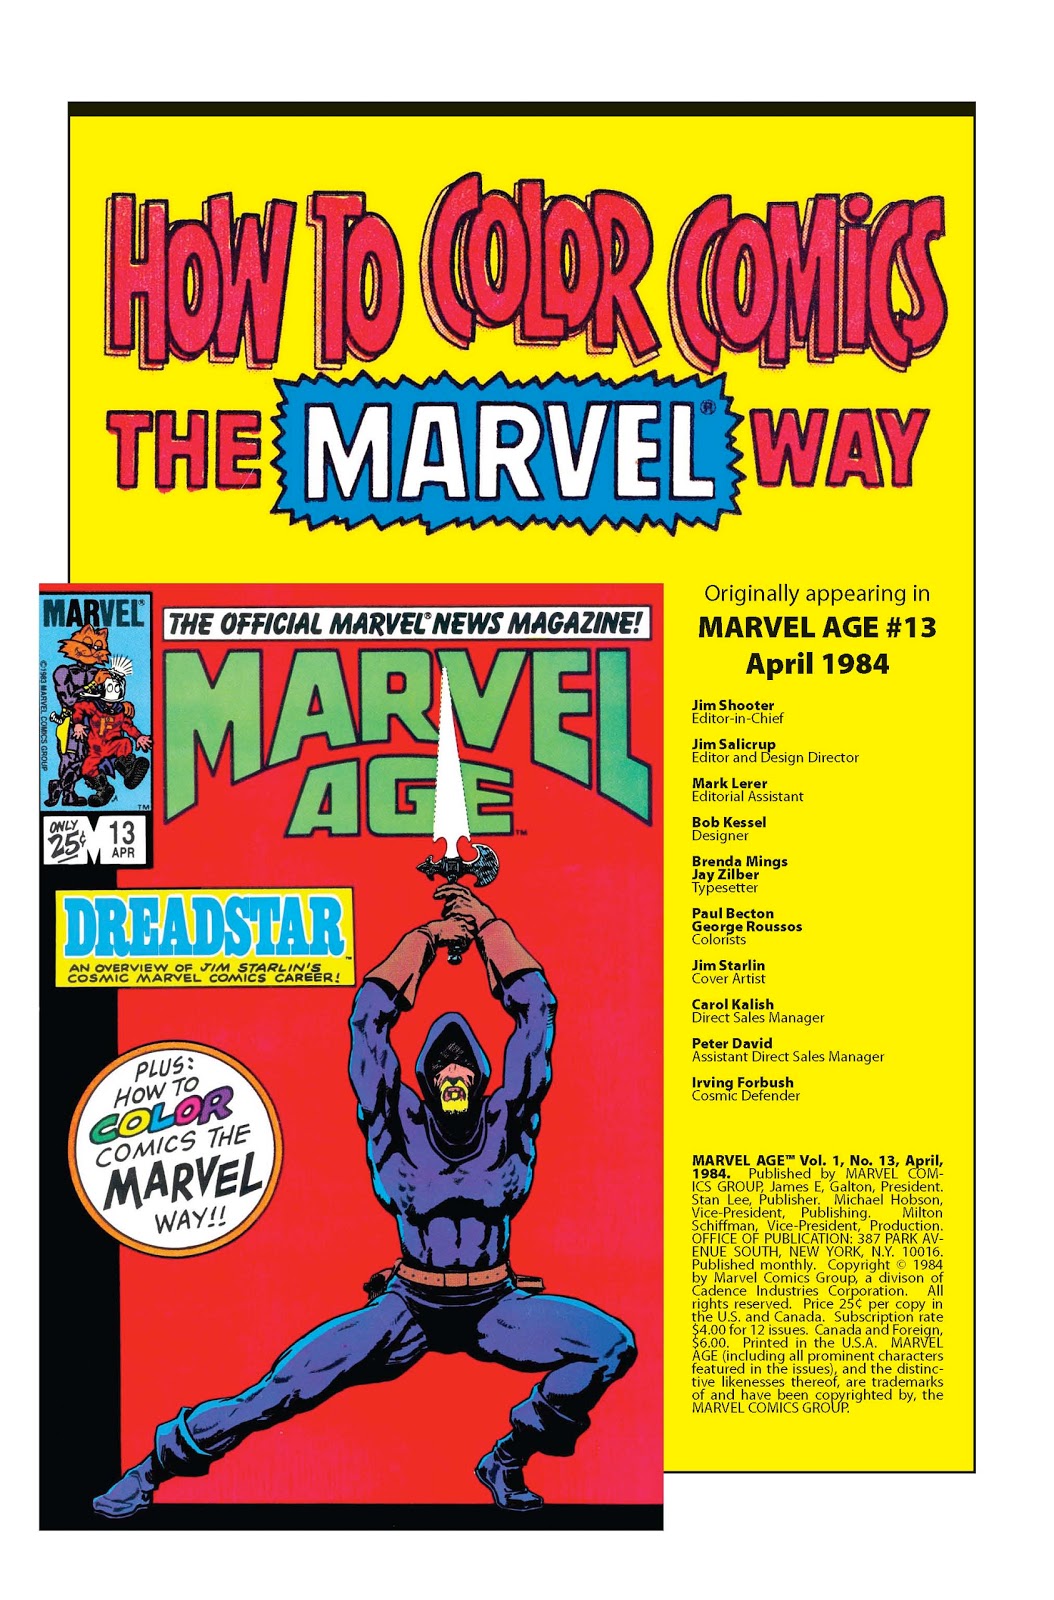 How to draw comics the marvel way pdf download download outlook 365